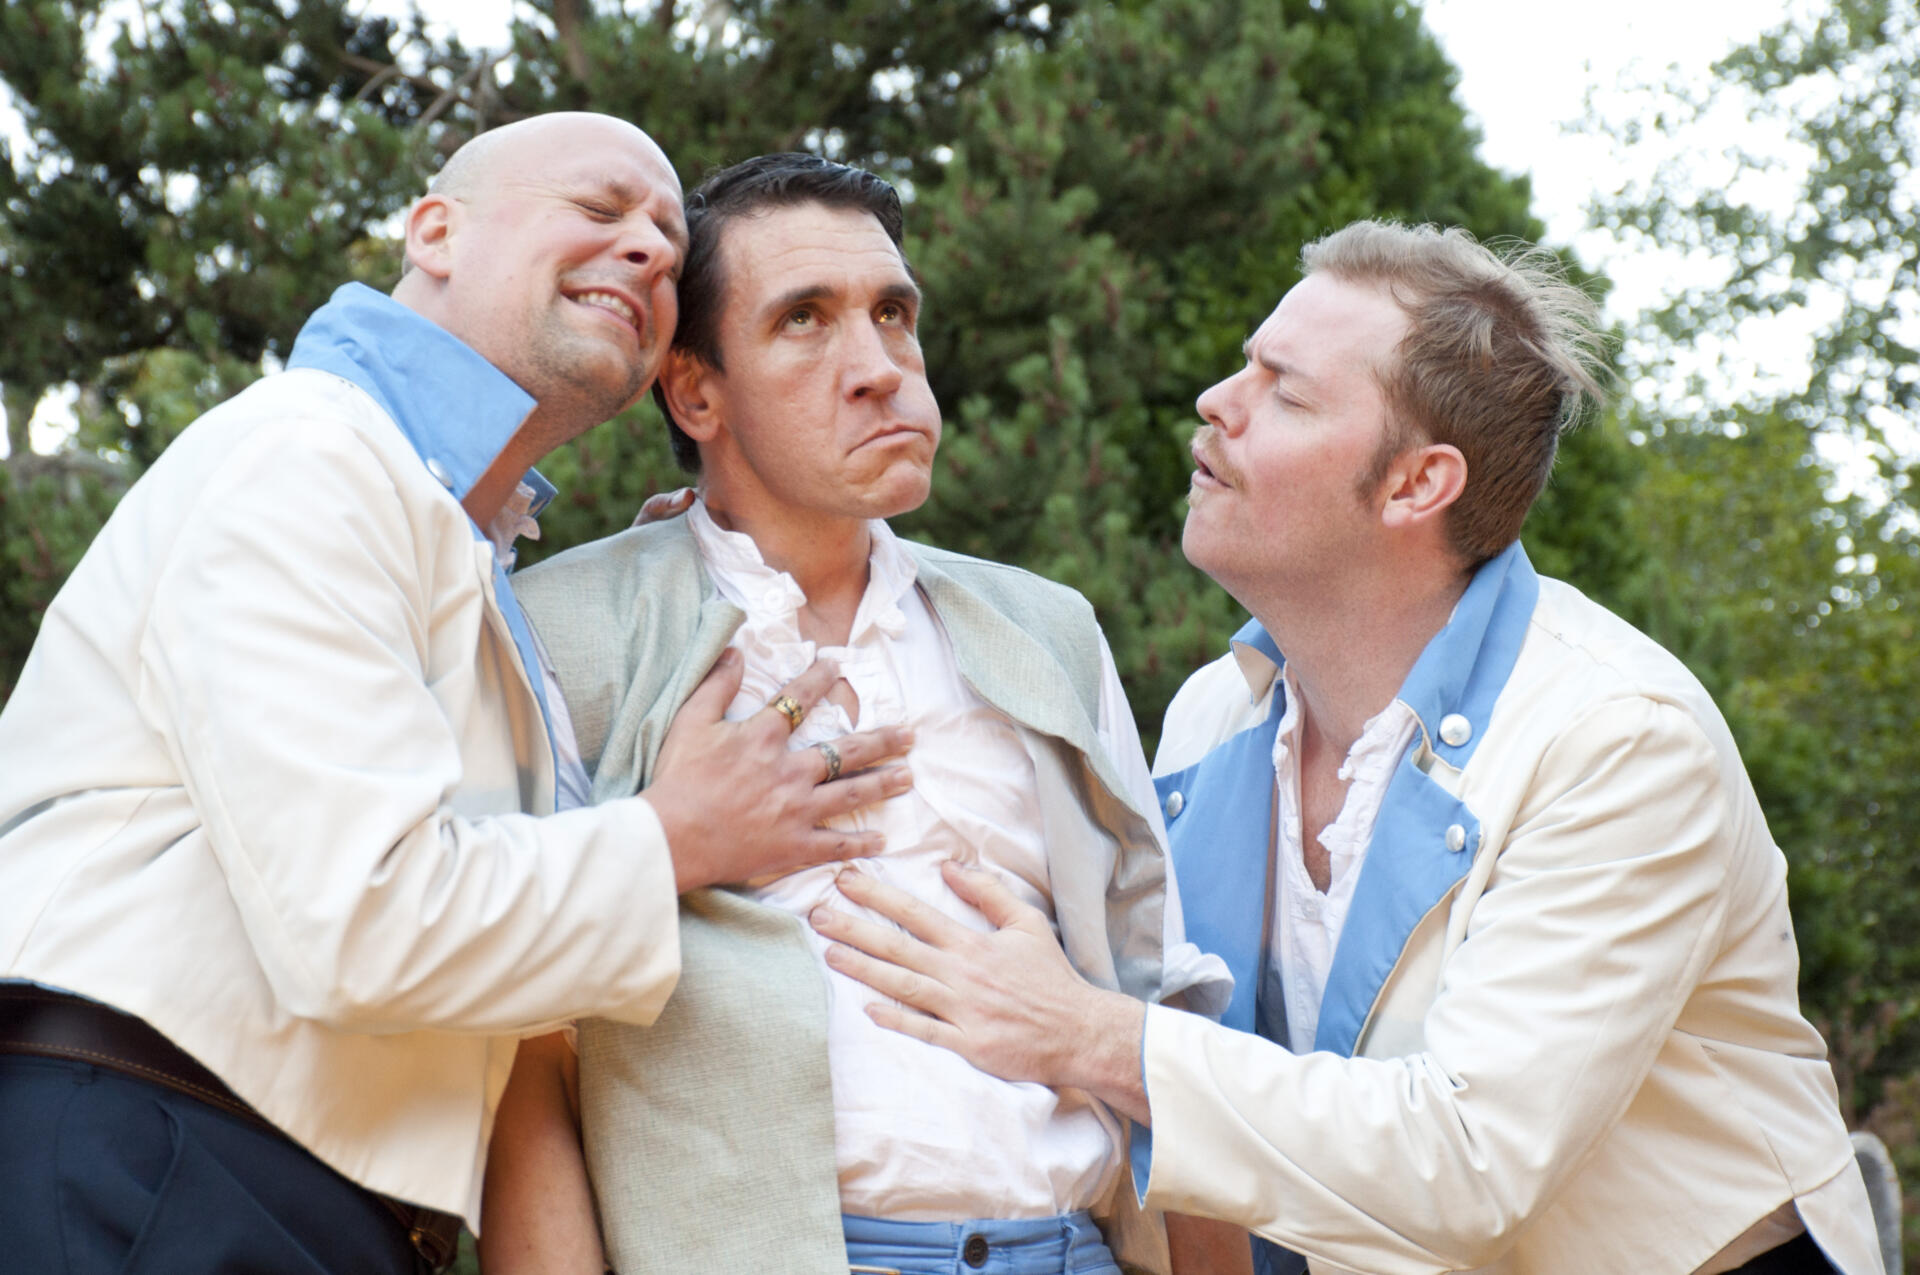 Daniel Woods, Jeff Pierce, and Andrew Shanks in Much Ado About Nothing - 2015